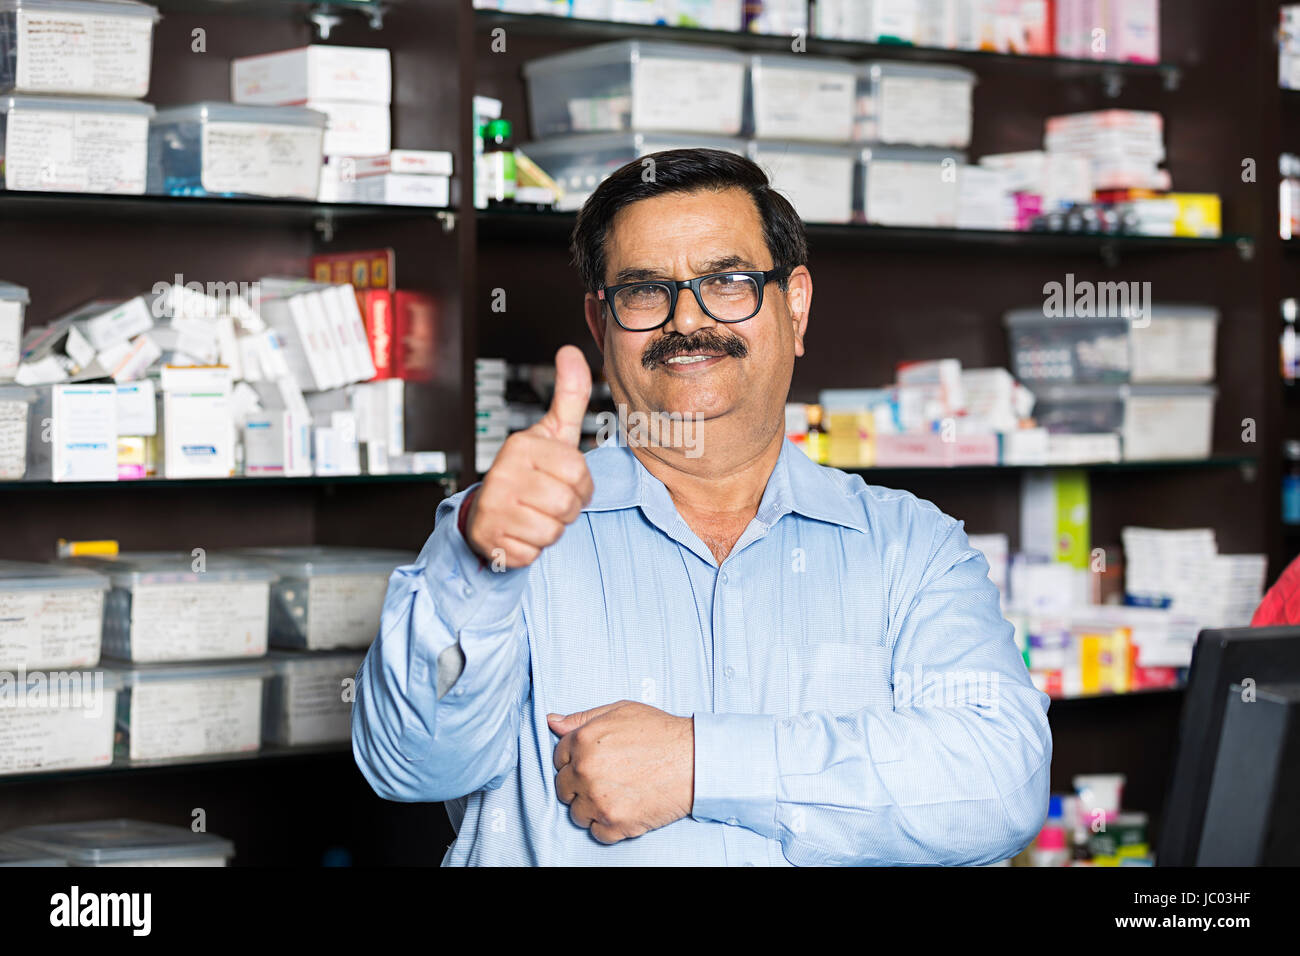 1 Indian Shopkeeper Man Success Thumbs up Showing In Chemist Shop Stock Photo